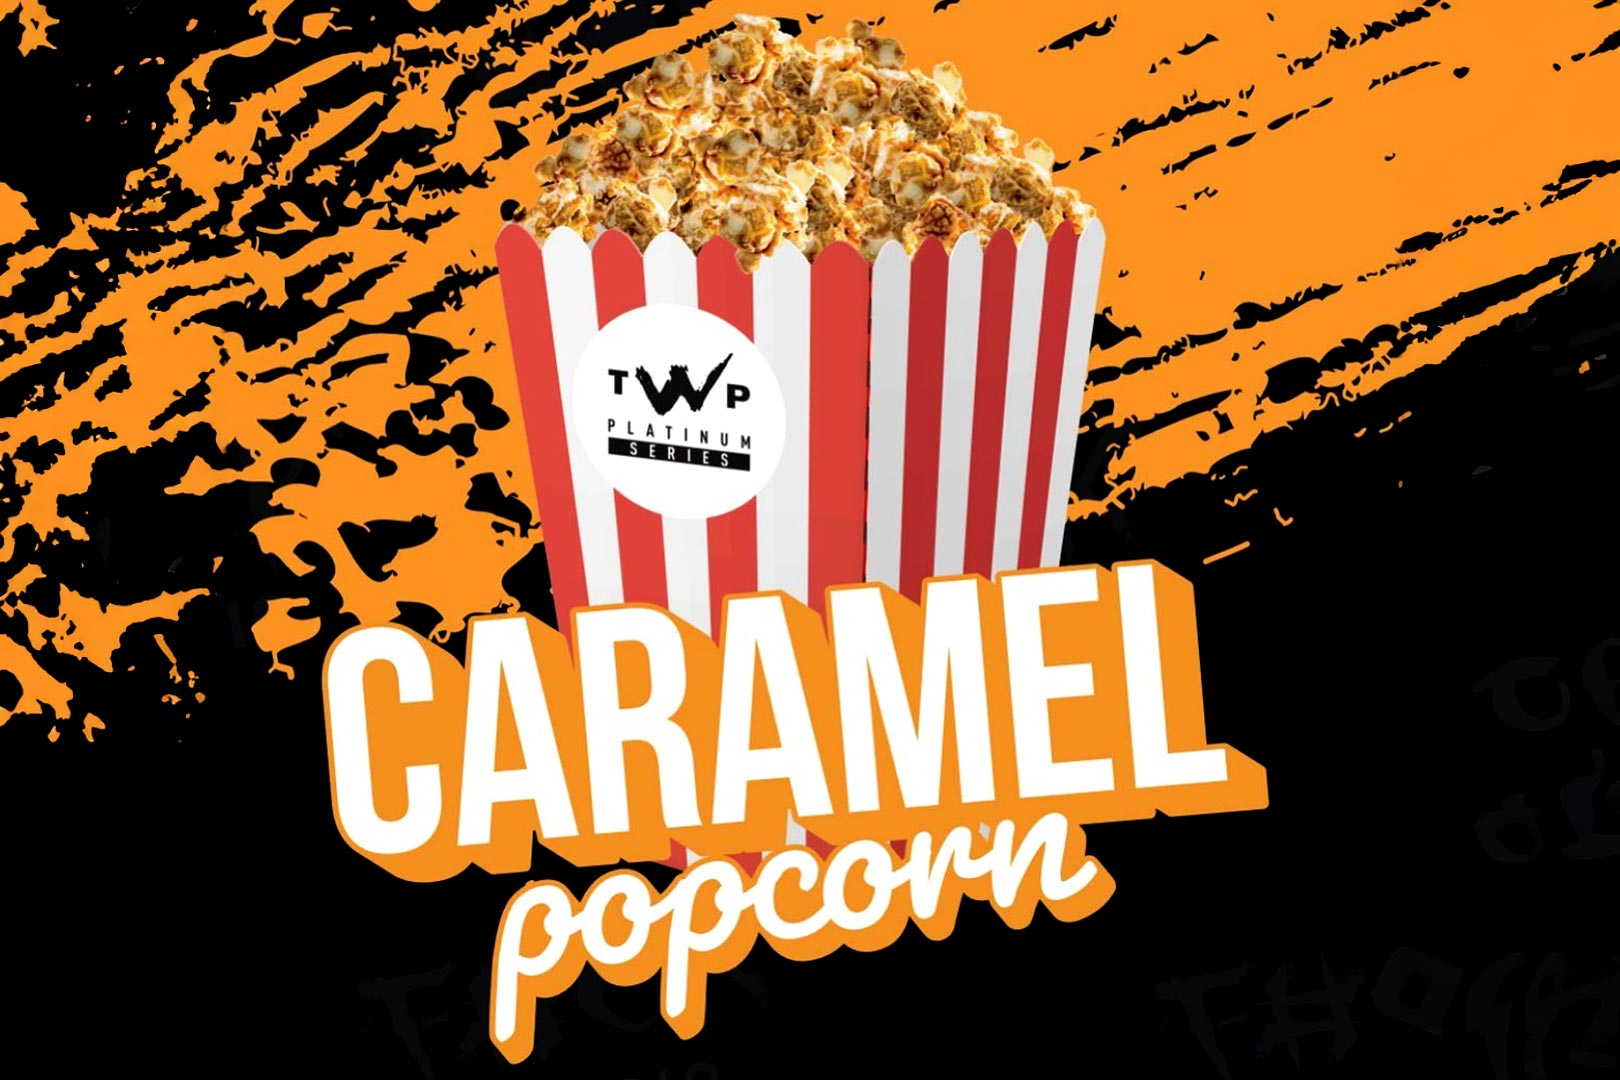 Twp Nutrition Caramel Popcorn All The Whey Up